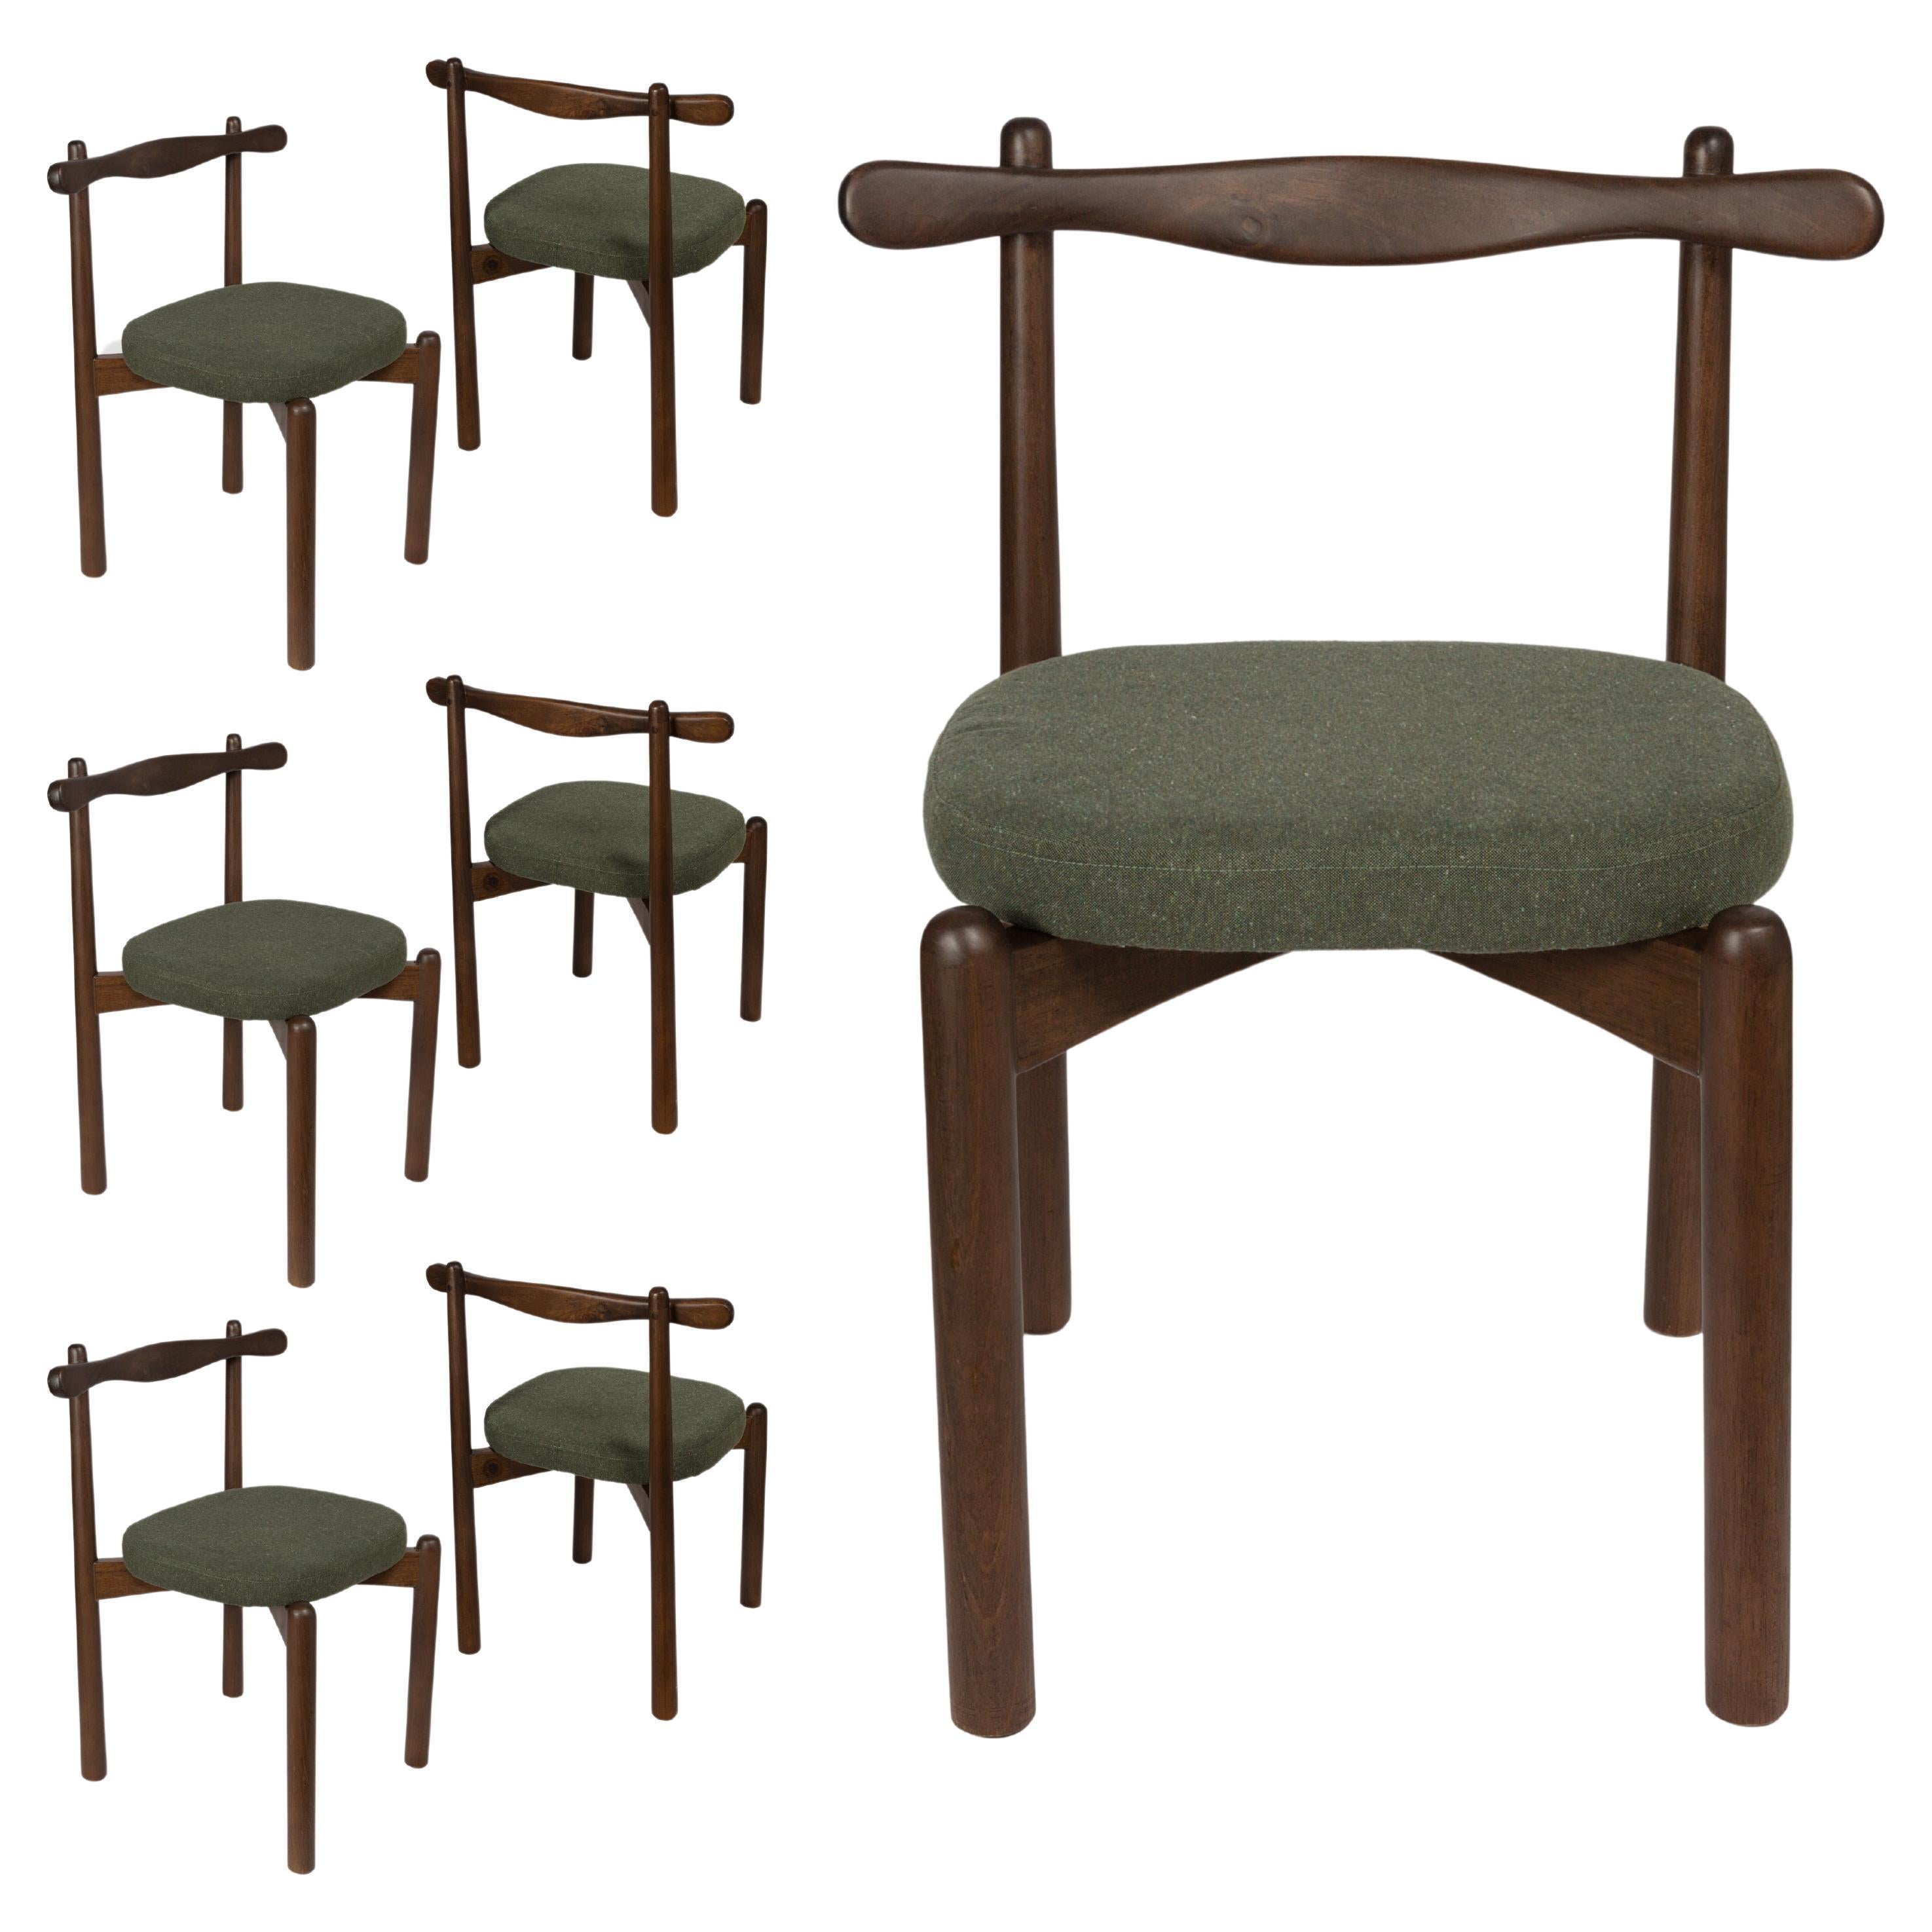 Set of 6 Dining Chairs Uçá Dark Light Brown Wood (fabric ref : F17) For Sale